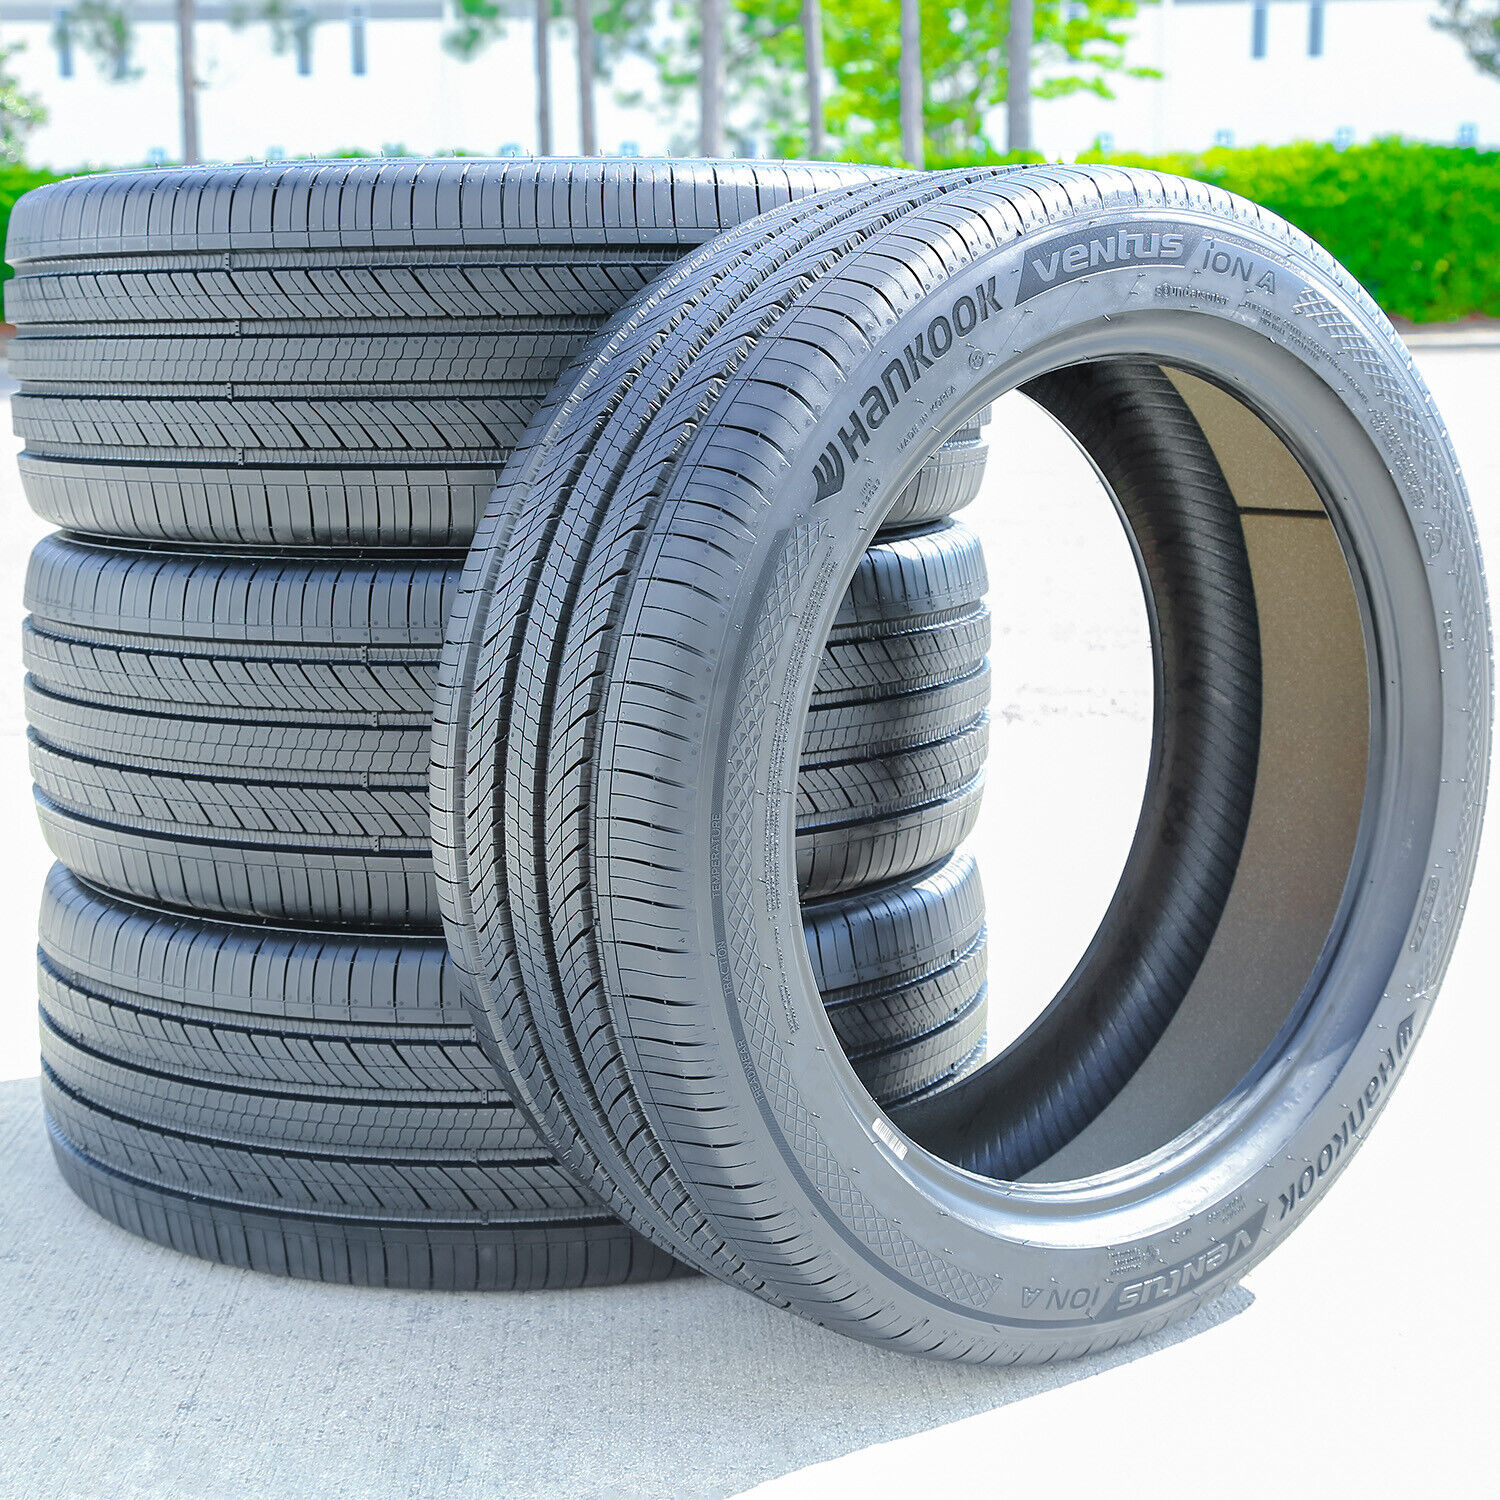 4 Tires Hankook Ventus iON A 235/45R18 98W XL AS A/S High Performance